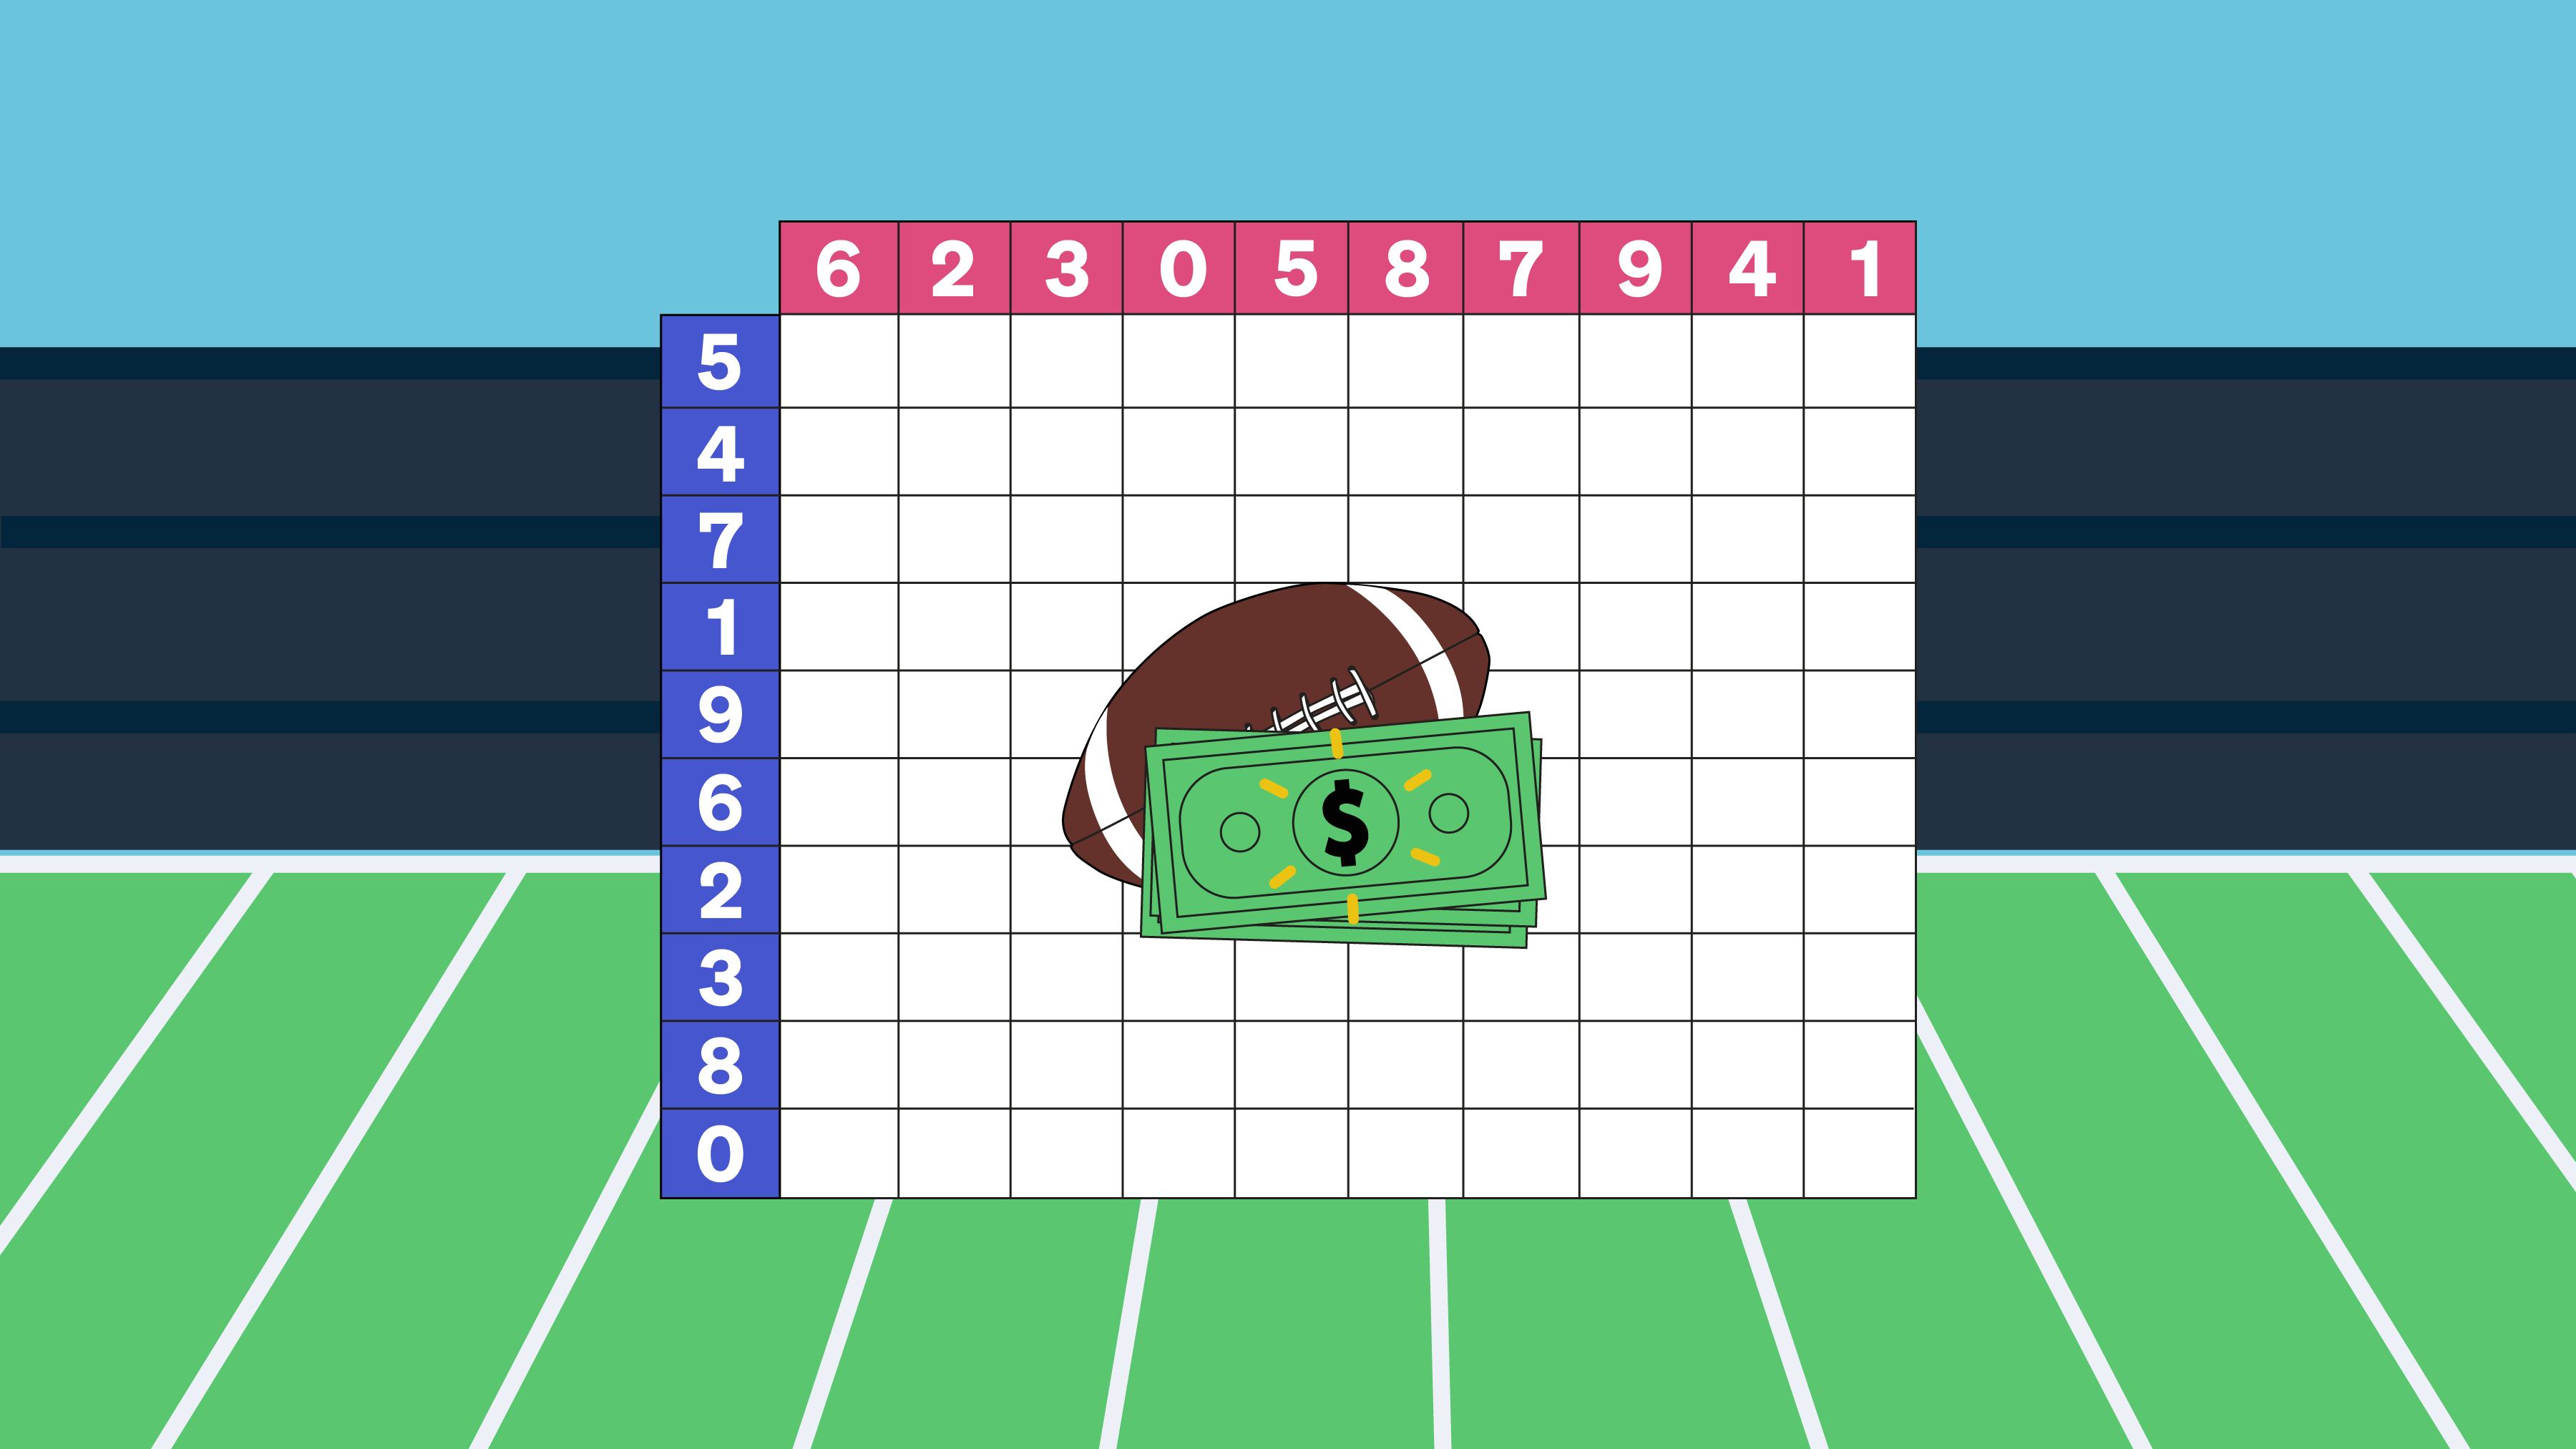 How to Pool Money for Super Bowl Squares